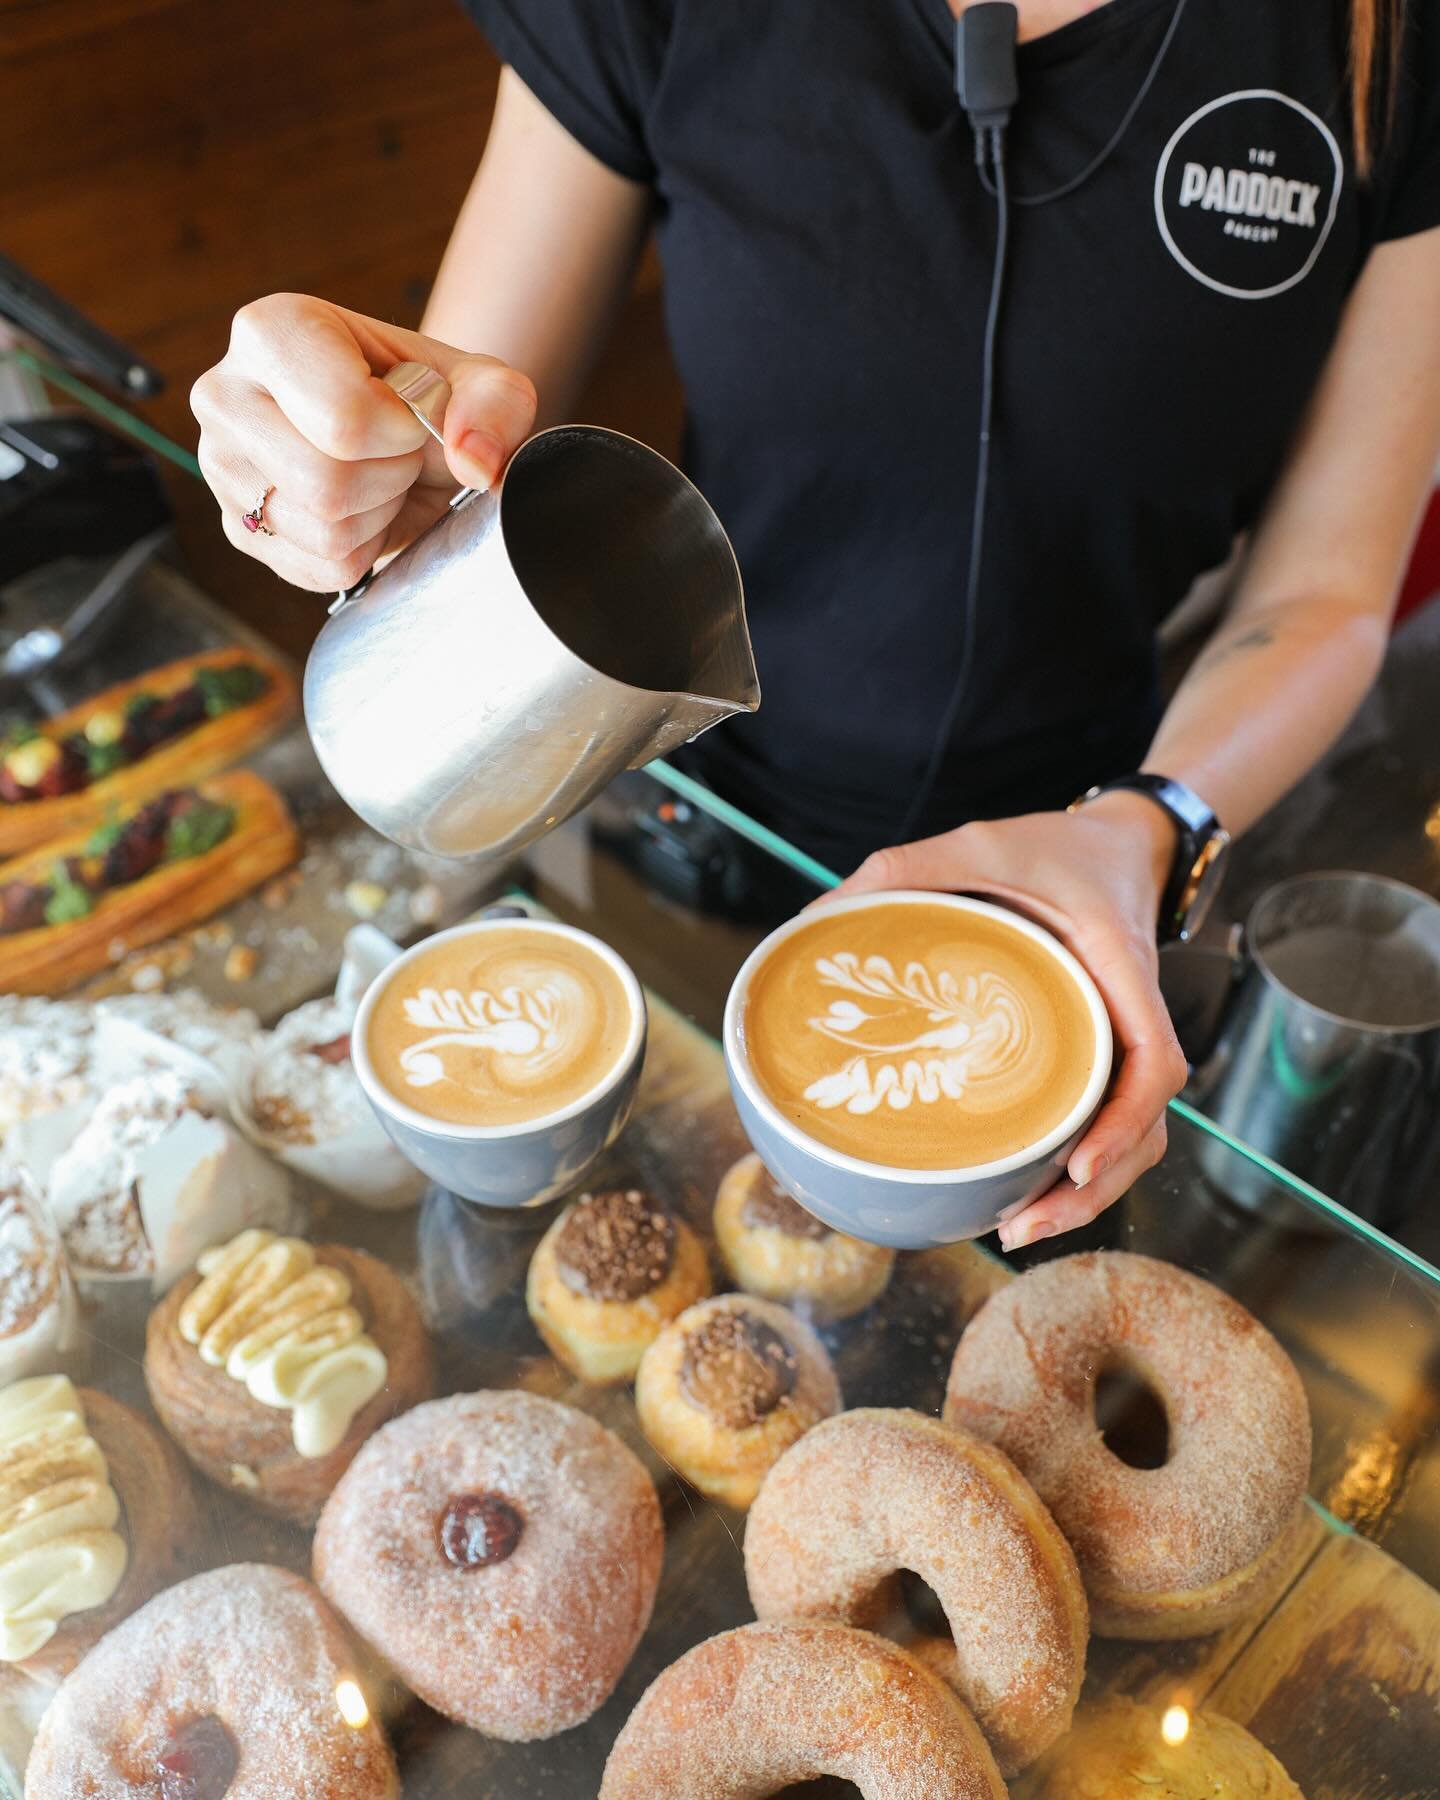 What more could you need this weekend&hellip;. ☕️🍩

open 7 days 🤍